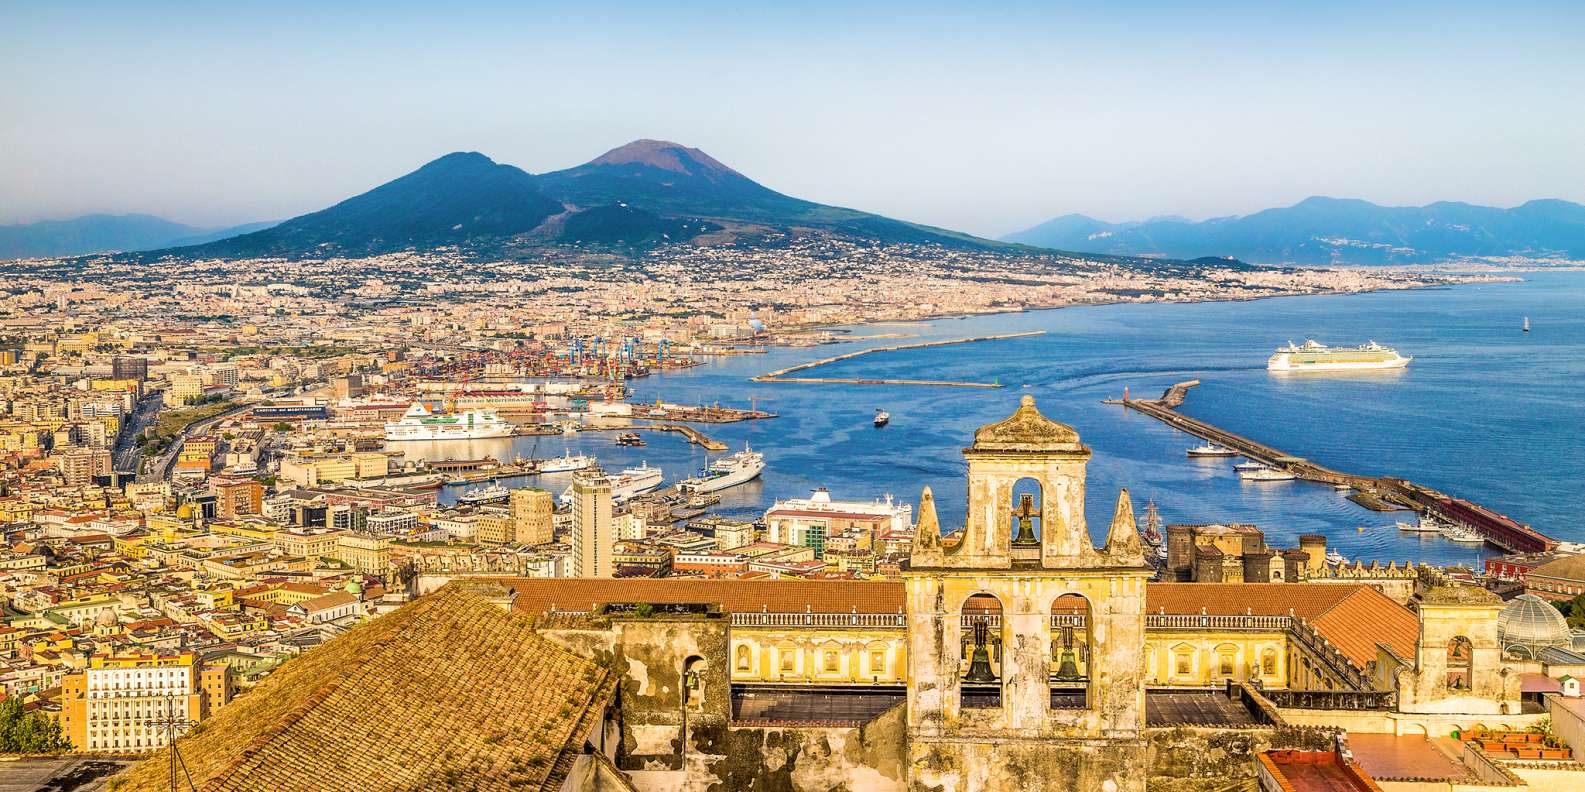 The BEST Naples Underground & catacombs 2023  FREE Cancellation GetYourGuide